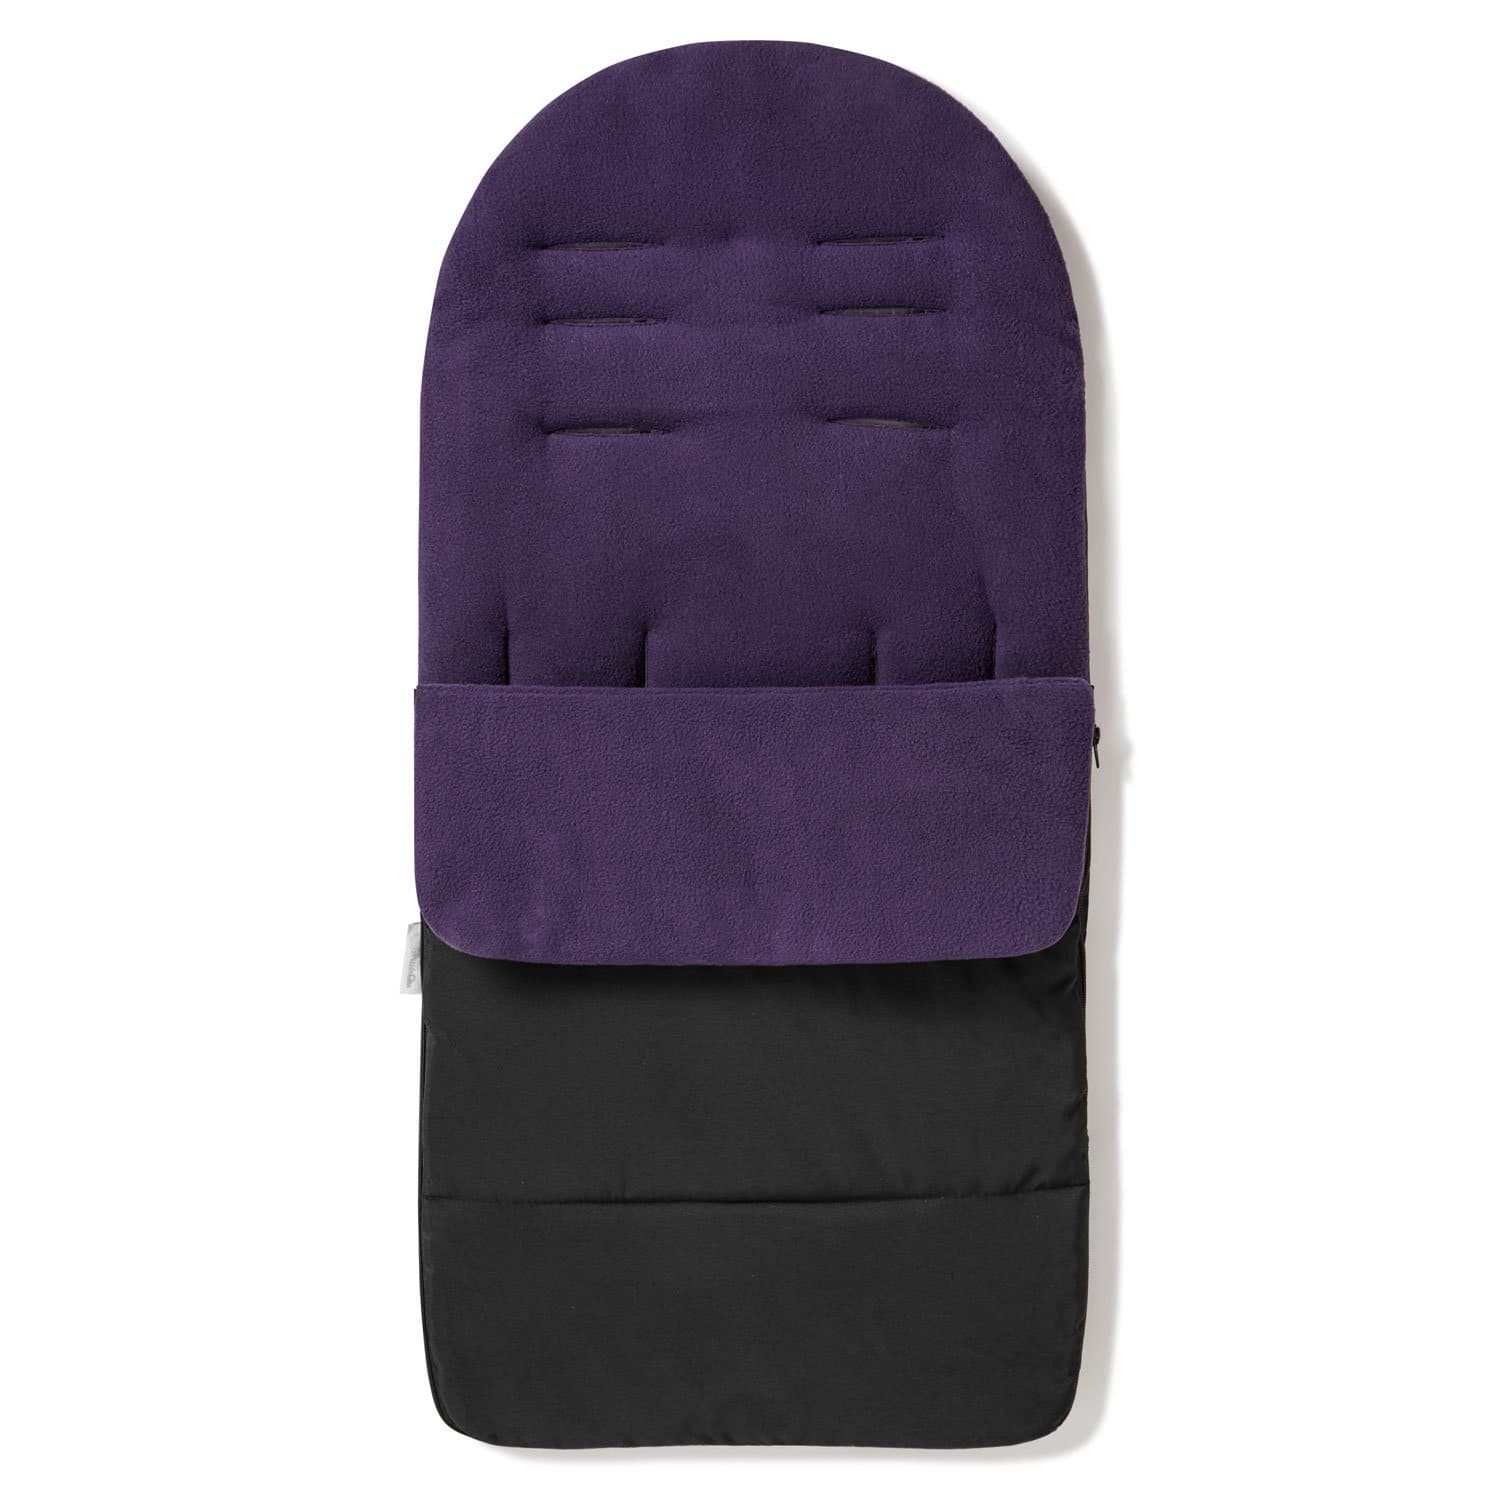 Premium Footmuff / Cosy Toes Compatible with Hartan - Plum Purple / Fits All Models | For Your Little One